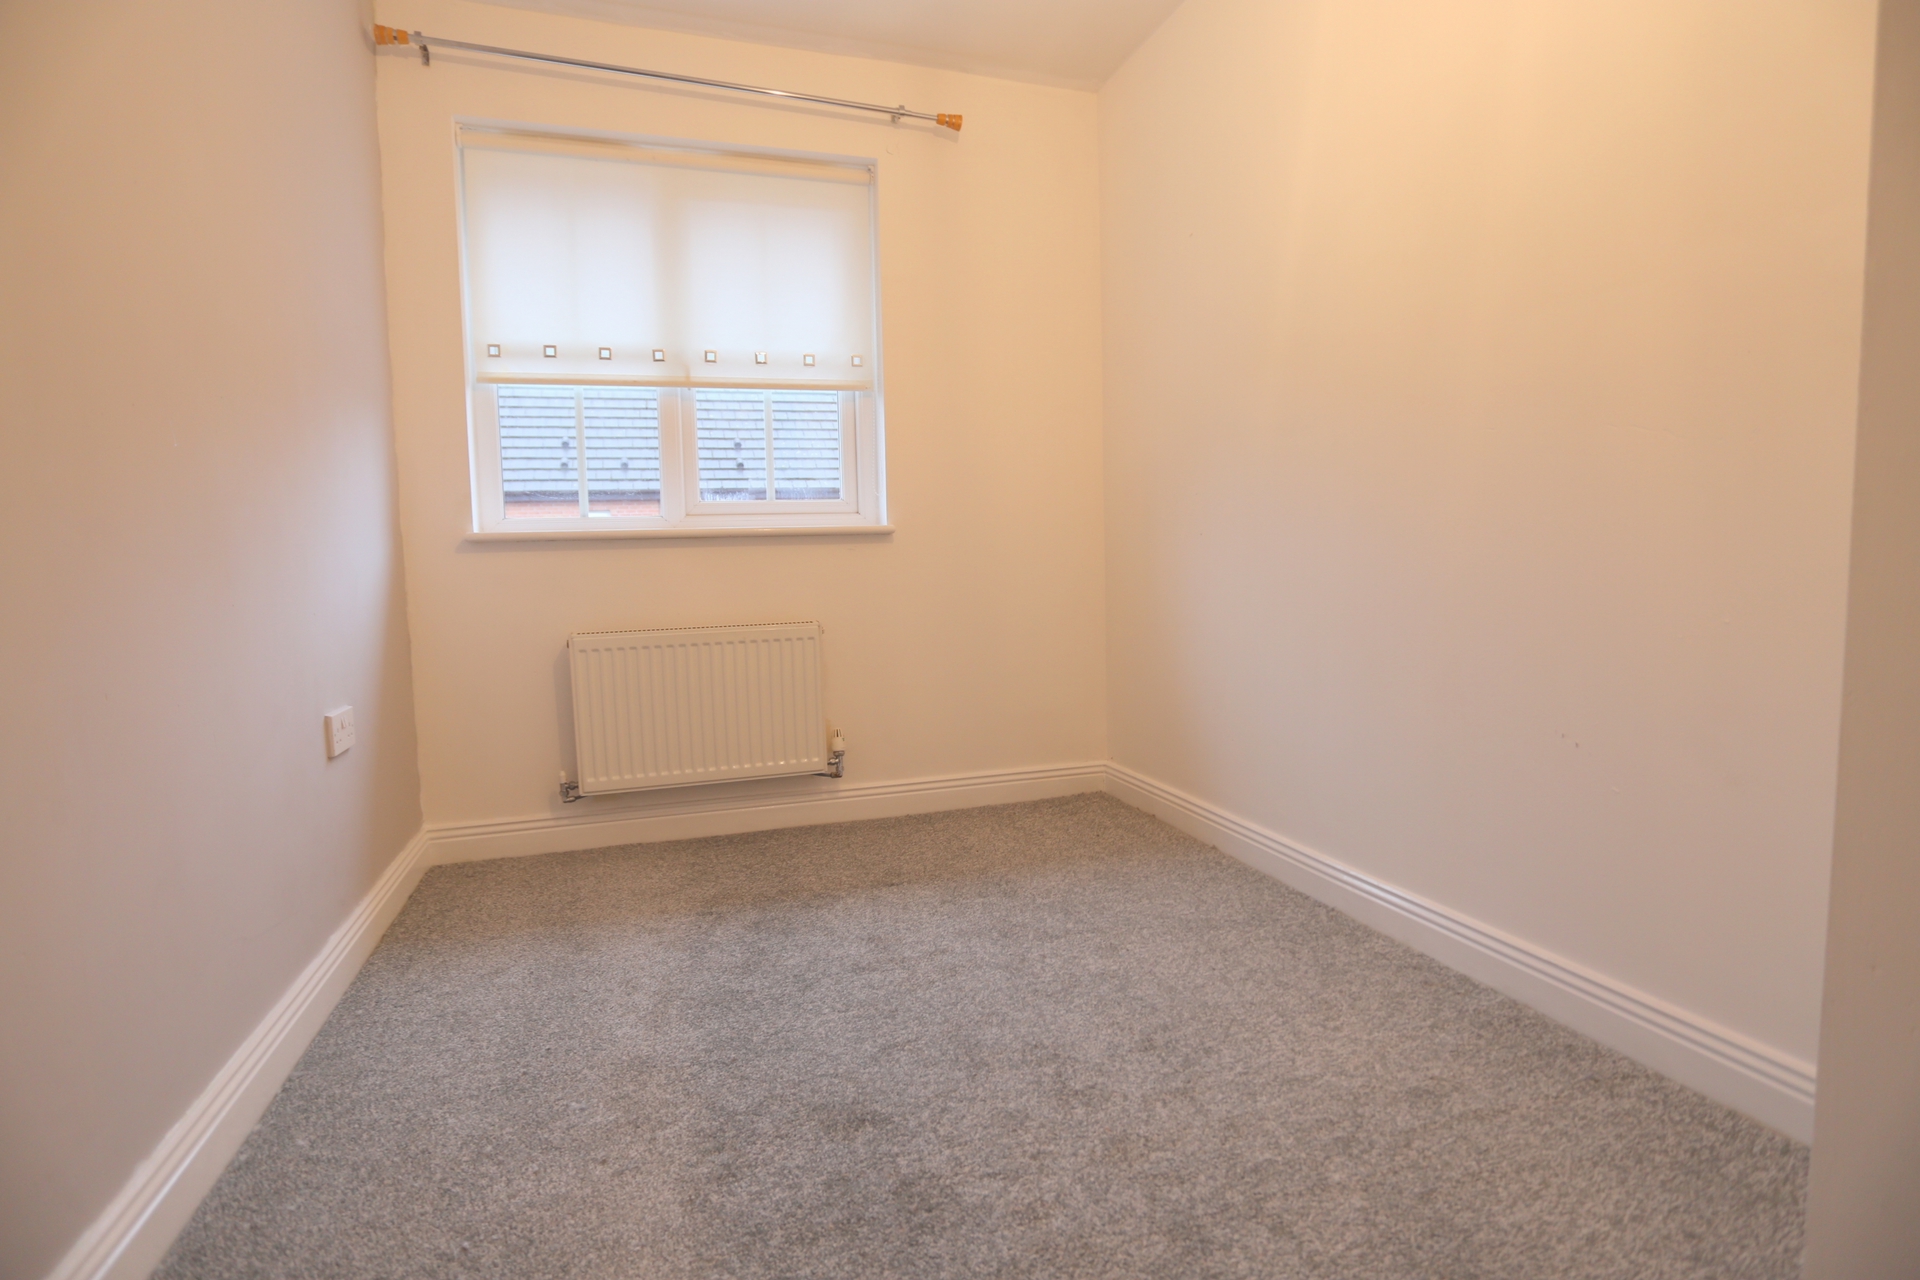 2 bedrooms town house, 16 Lychgate Close Stoke on Trent Staffordshire